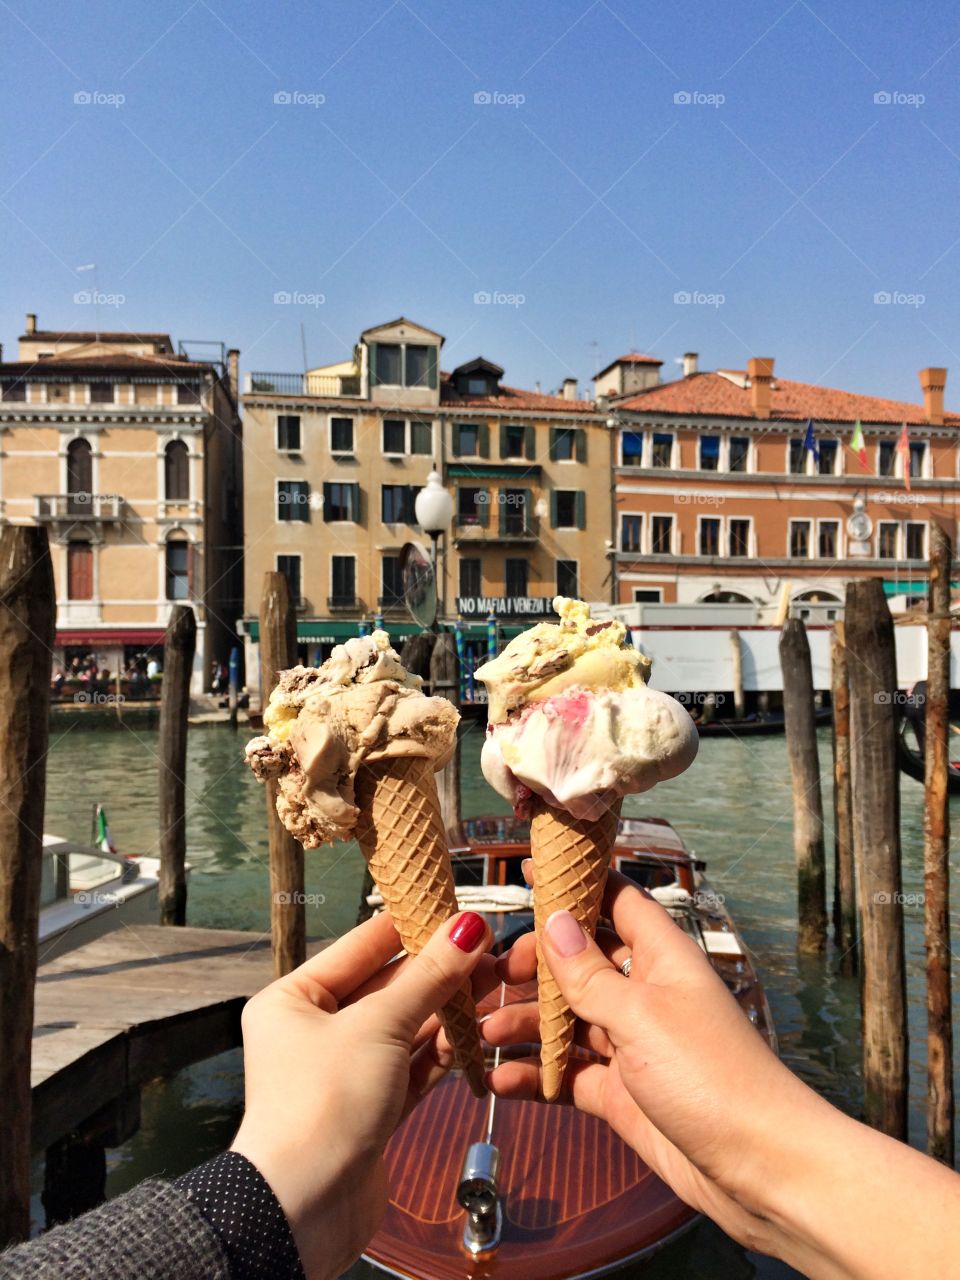 Exploring Venice together